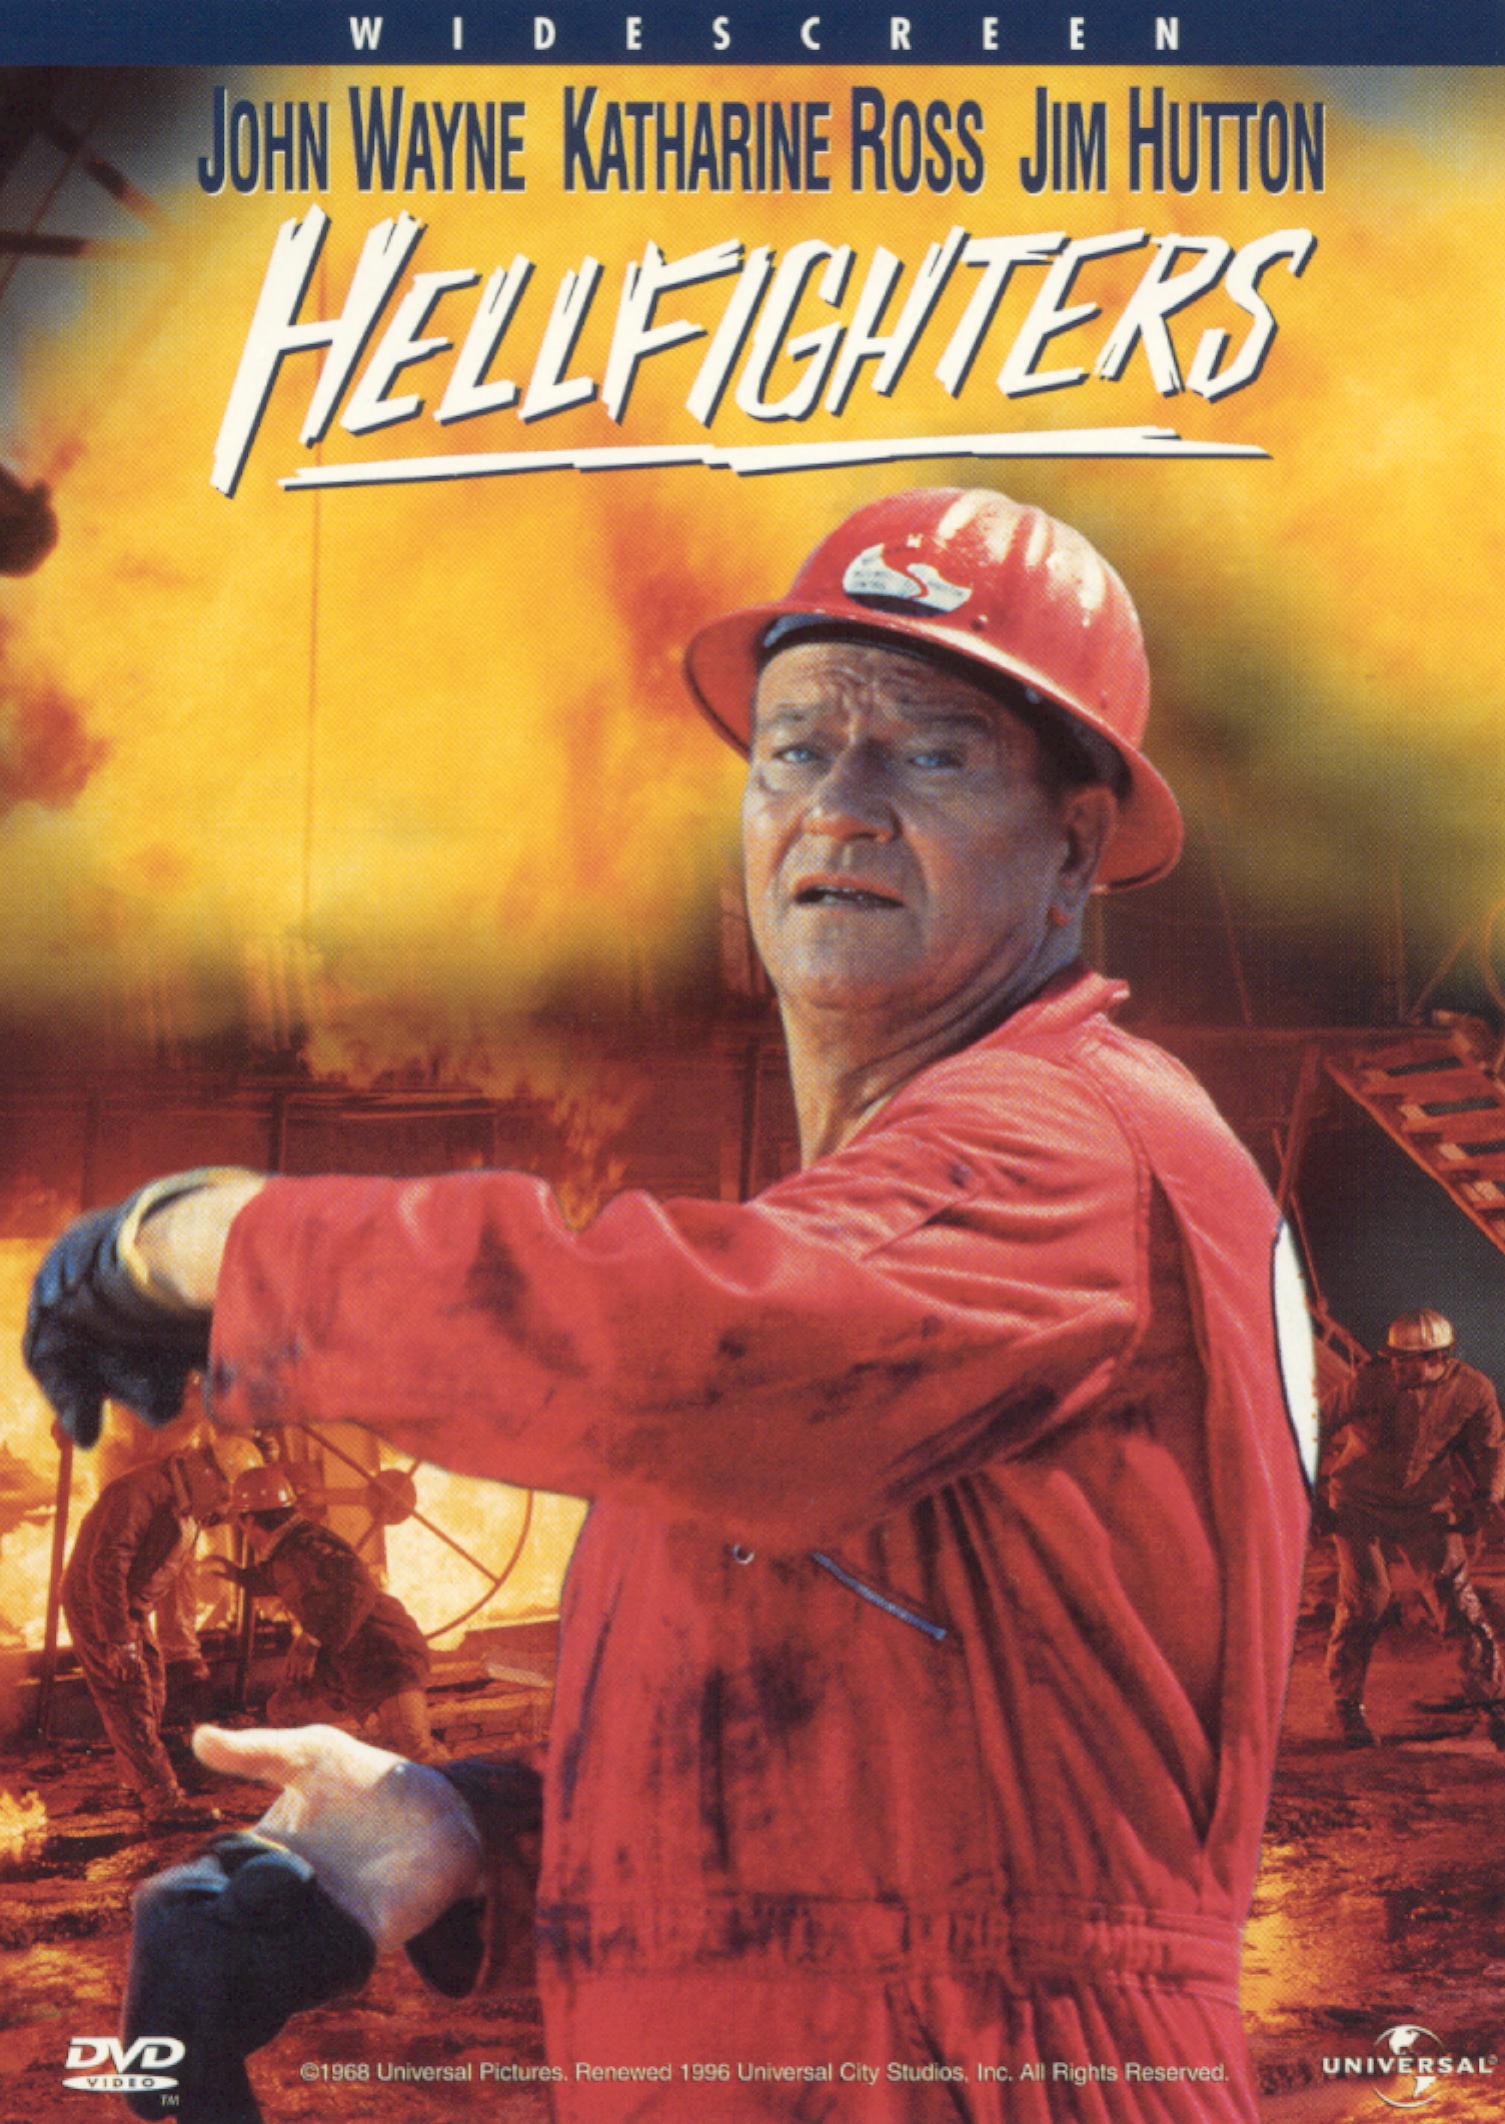 Hellfighters cover art